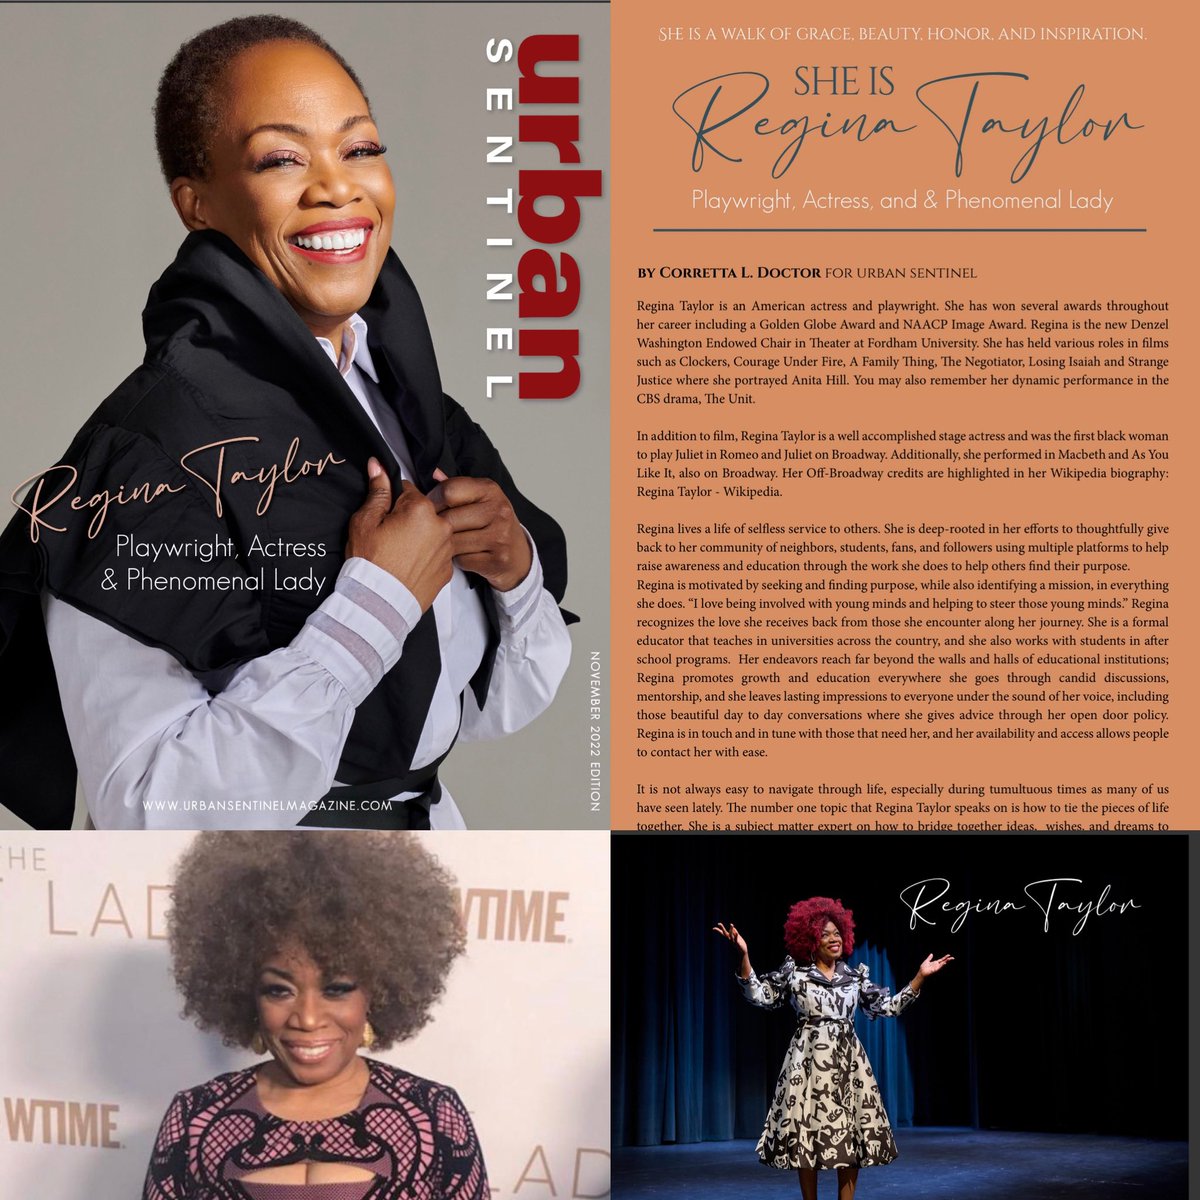 Please check out Regina Taylor in this month’s edition of The Urban Sentinel Magazine. urbansentinelmagazine.com   #reginataylor #naccpimageawards #actress #actor #movies #goldenglobes